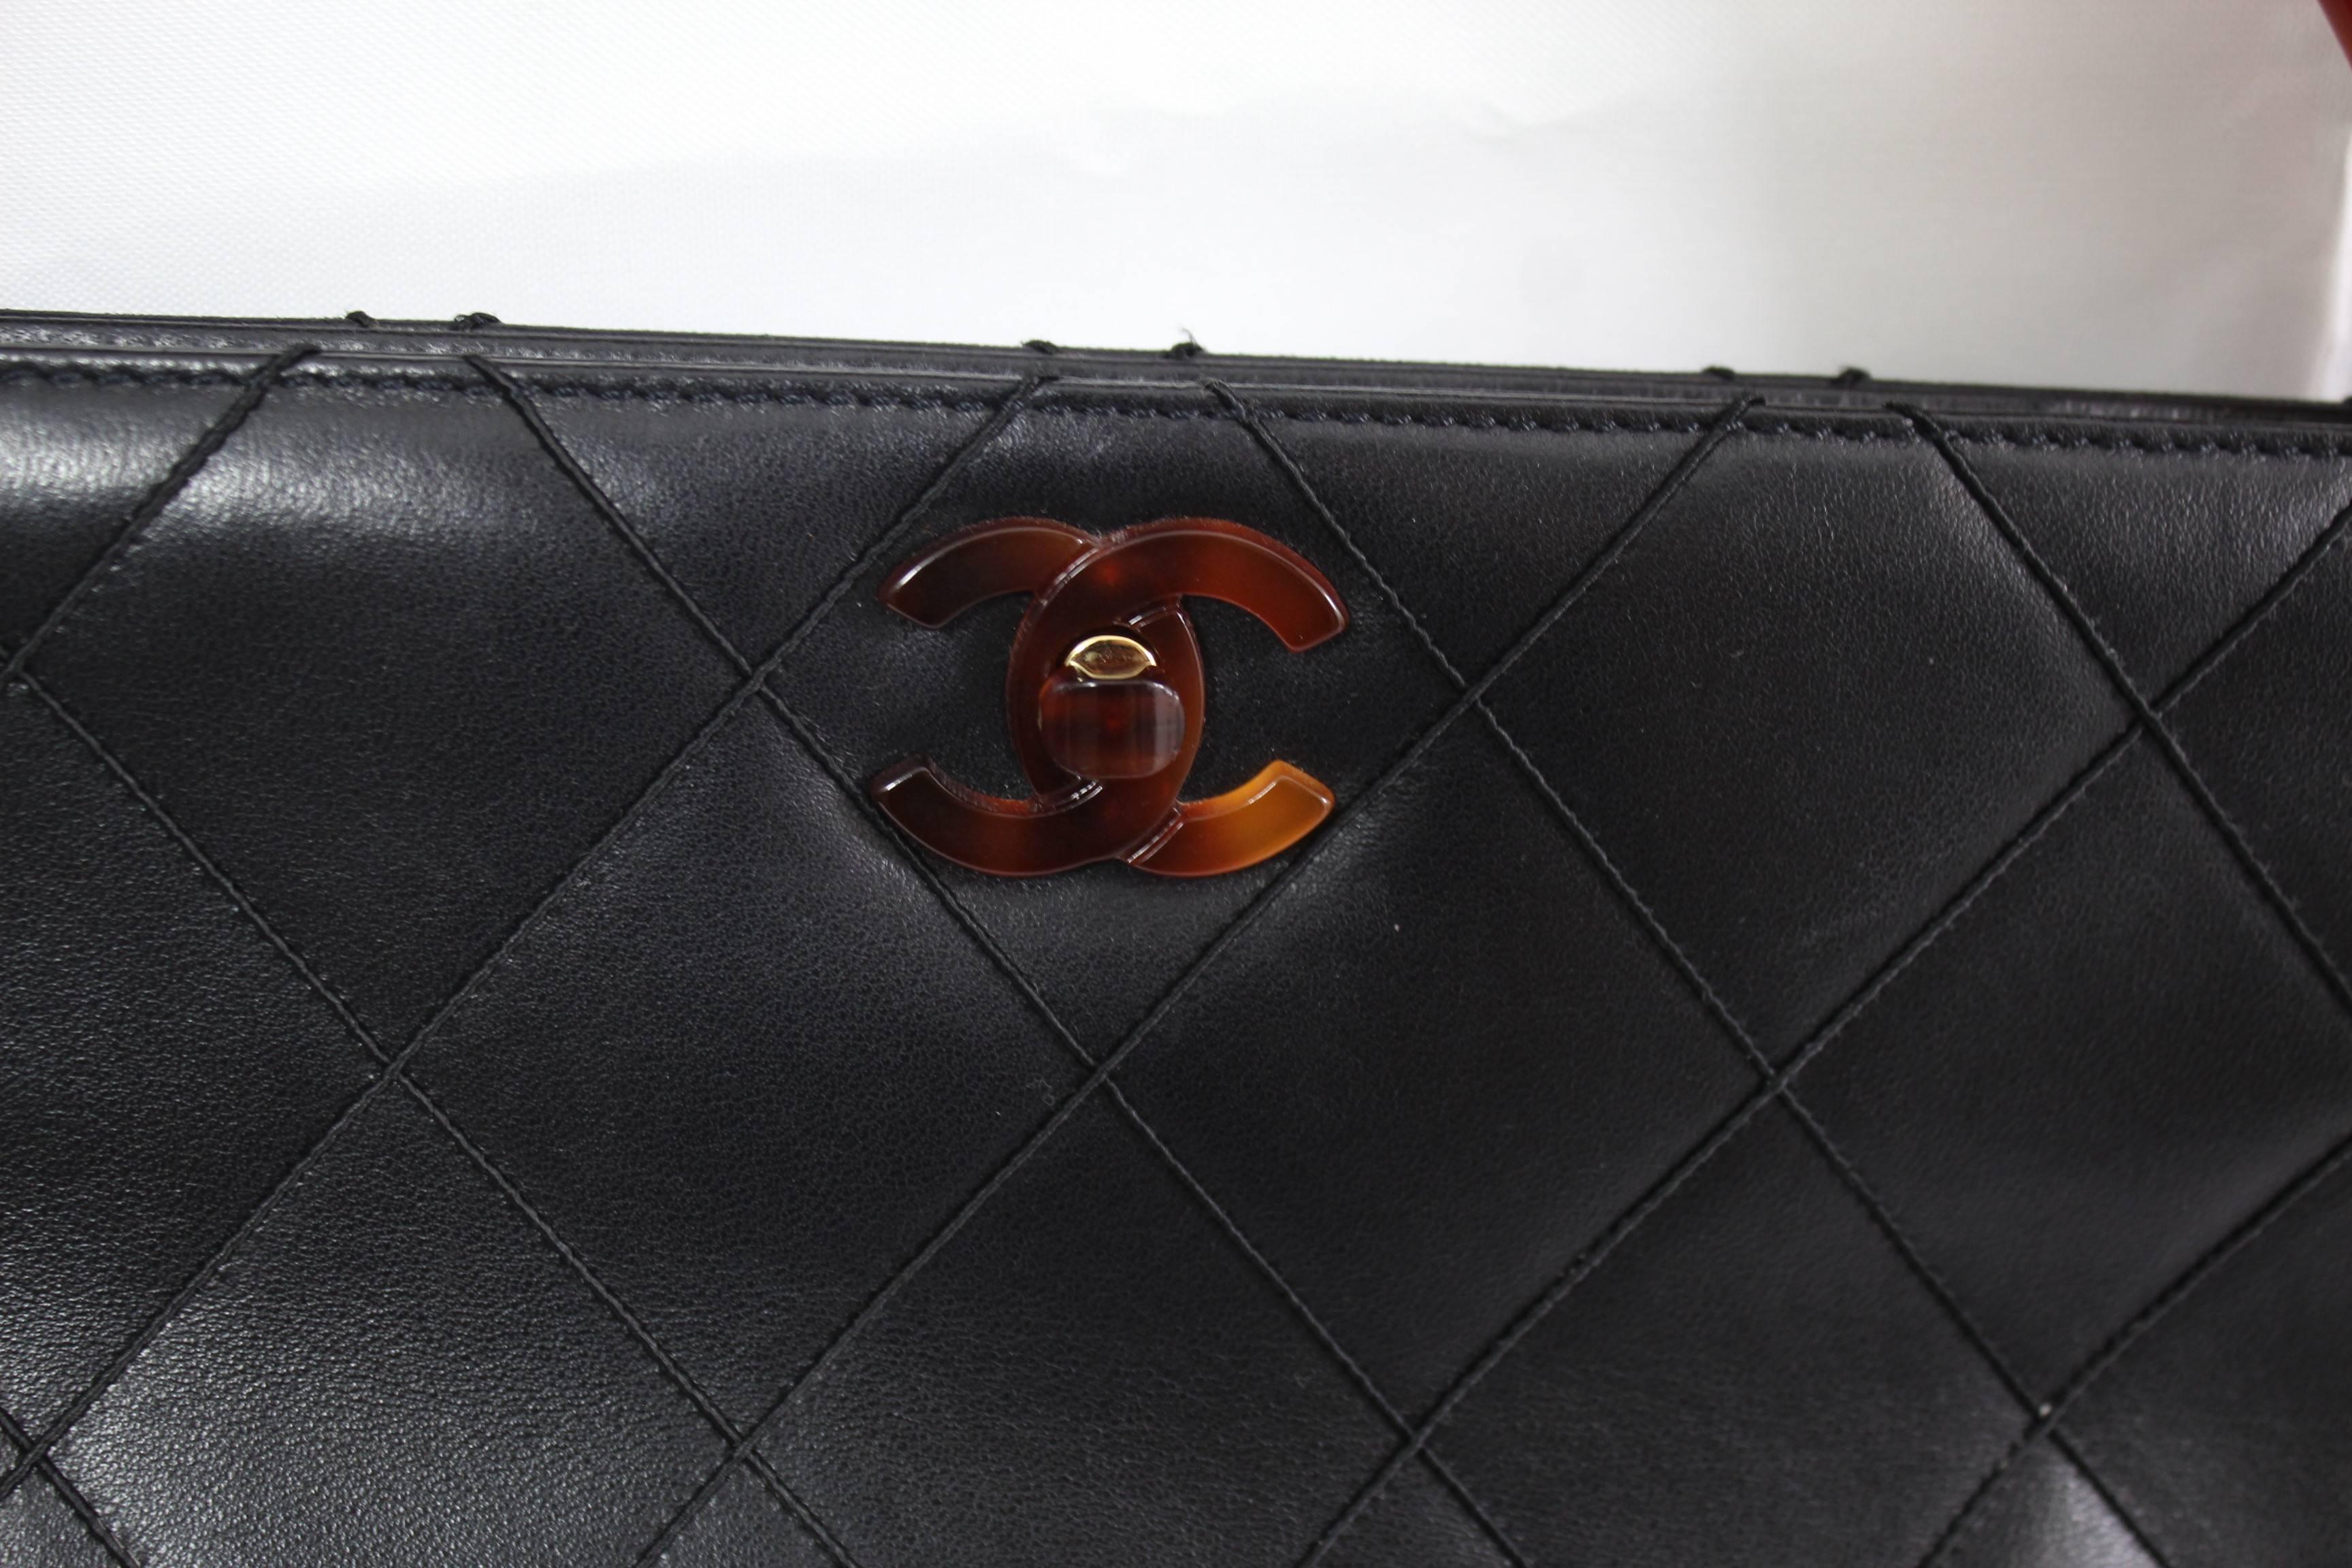 Chanel Vintage bag in Lambskin Leather and bakelite hardware and handles

Really good condition

Size 11.5x9